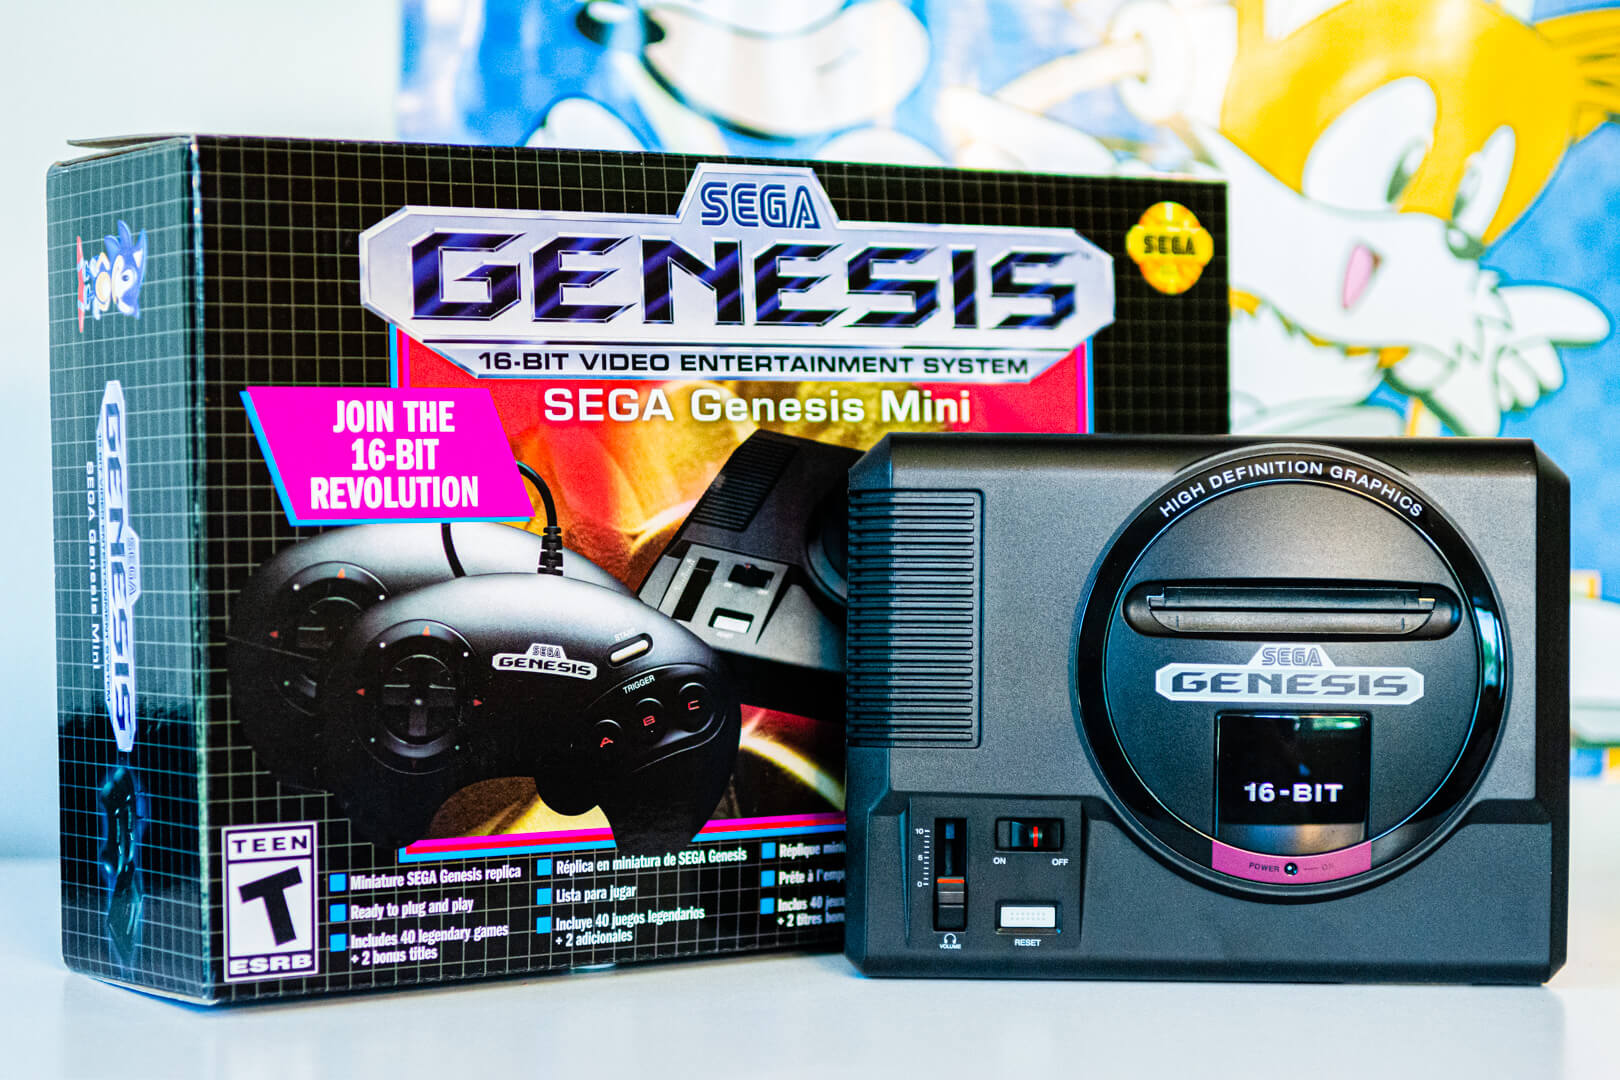 Sega Genesis Mini review round-up: The best miniature console yet?